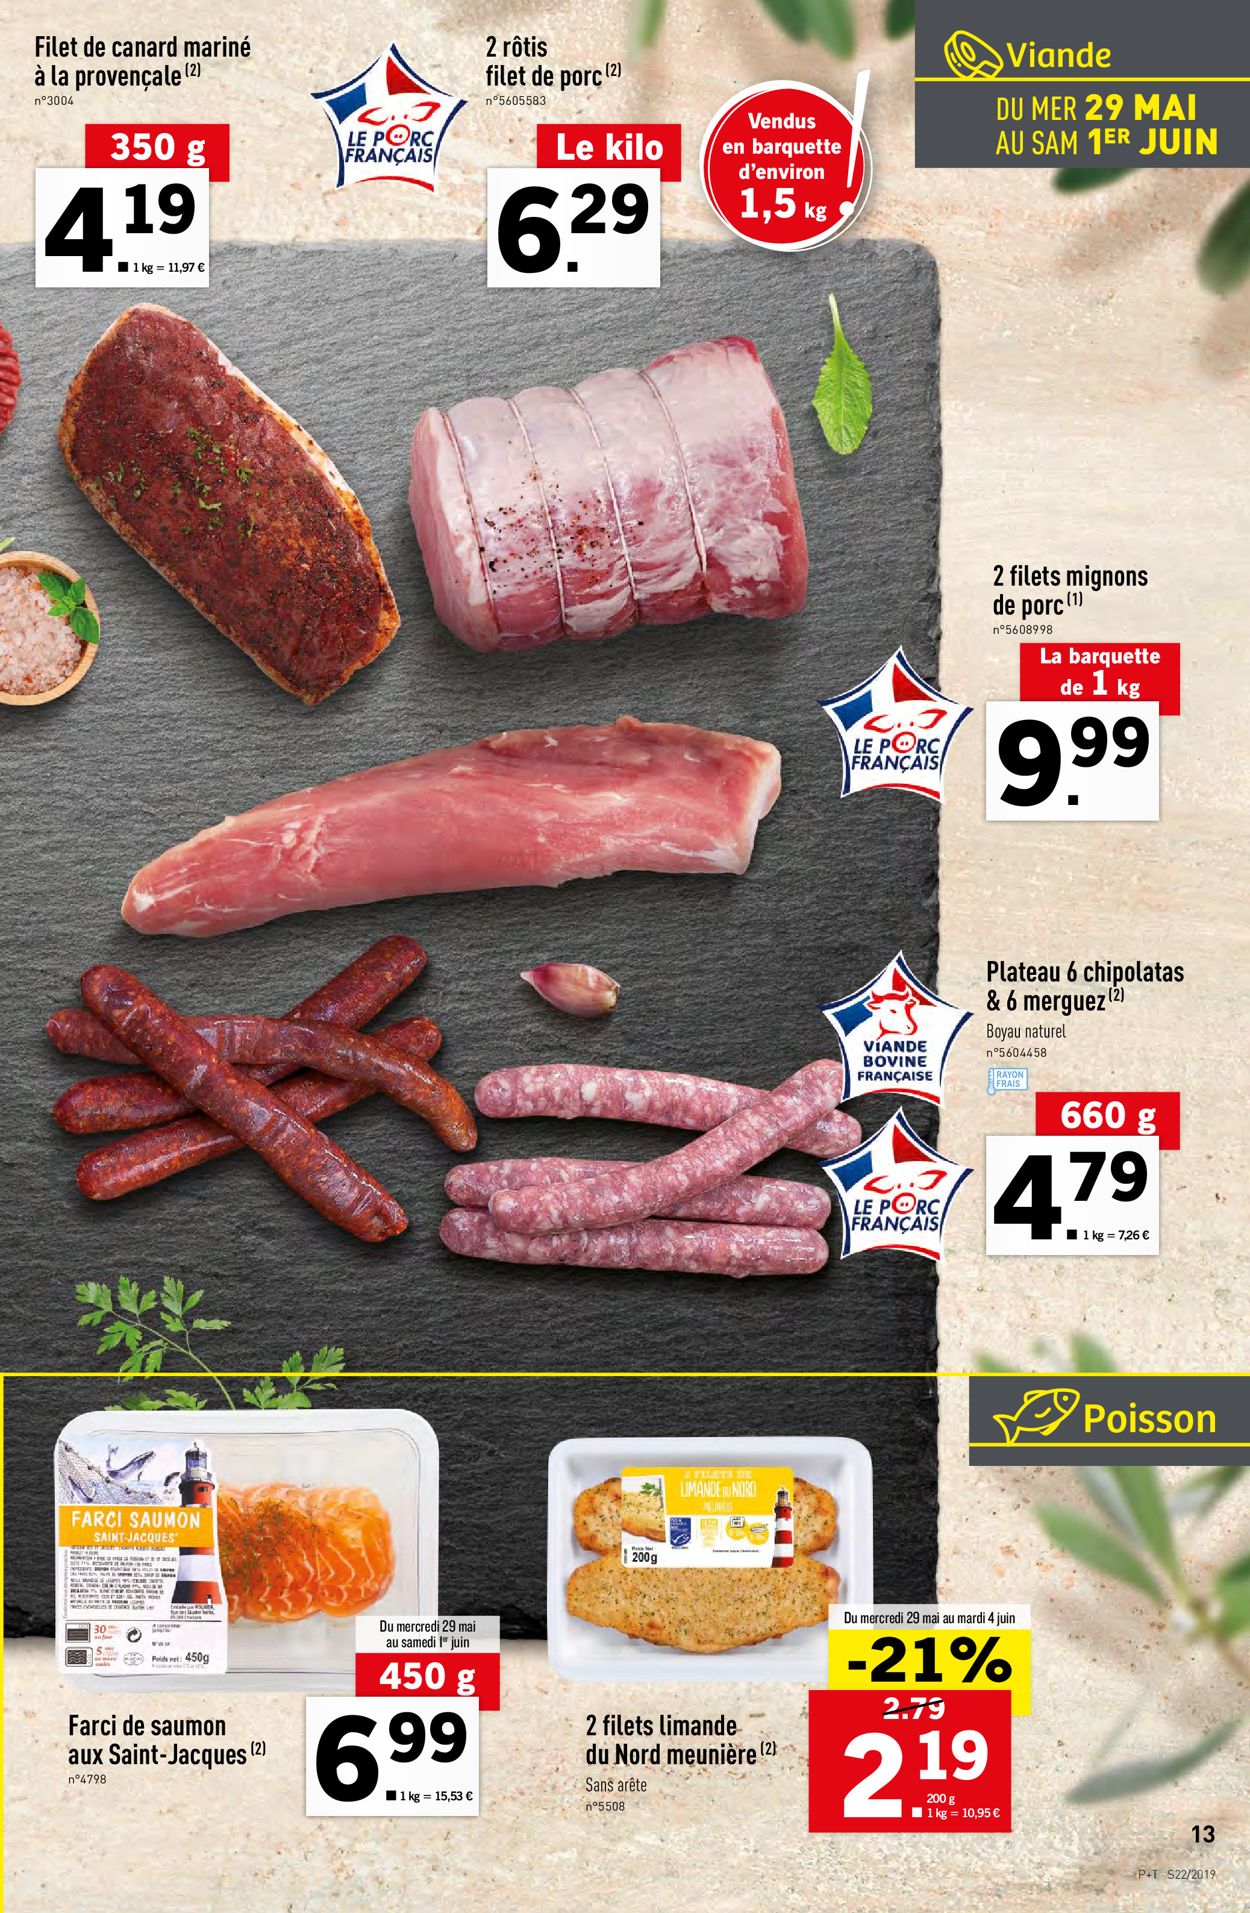 Lidl Catalogue - 29.05-04.06.2019 (Page 13)